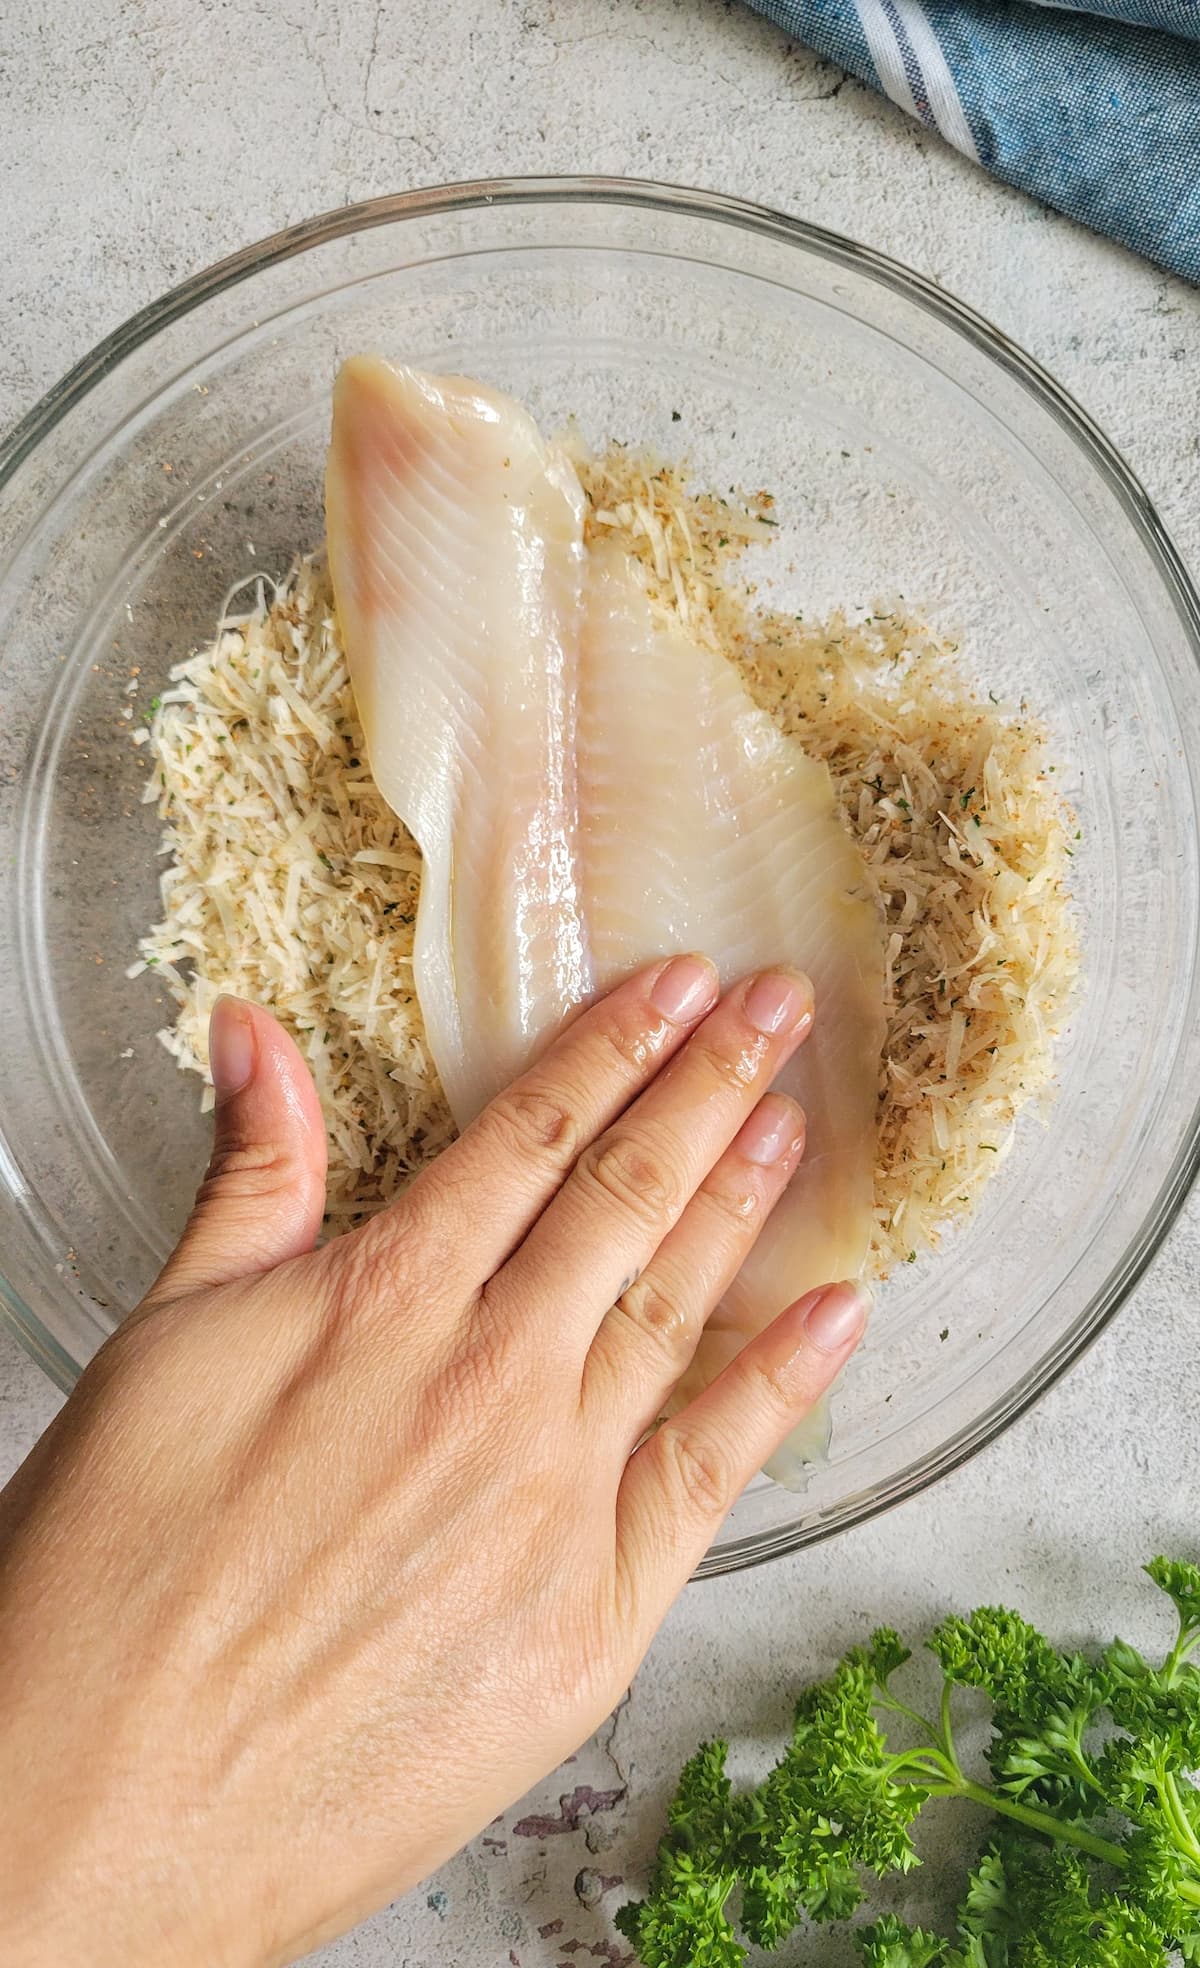 hand pressing a raw piece of white fish into a bowl of parmesan cheese and spices